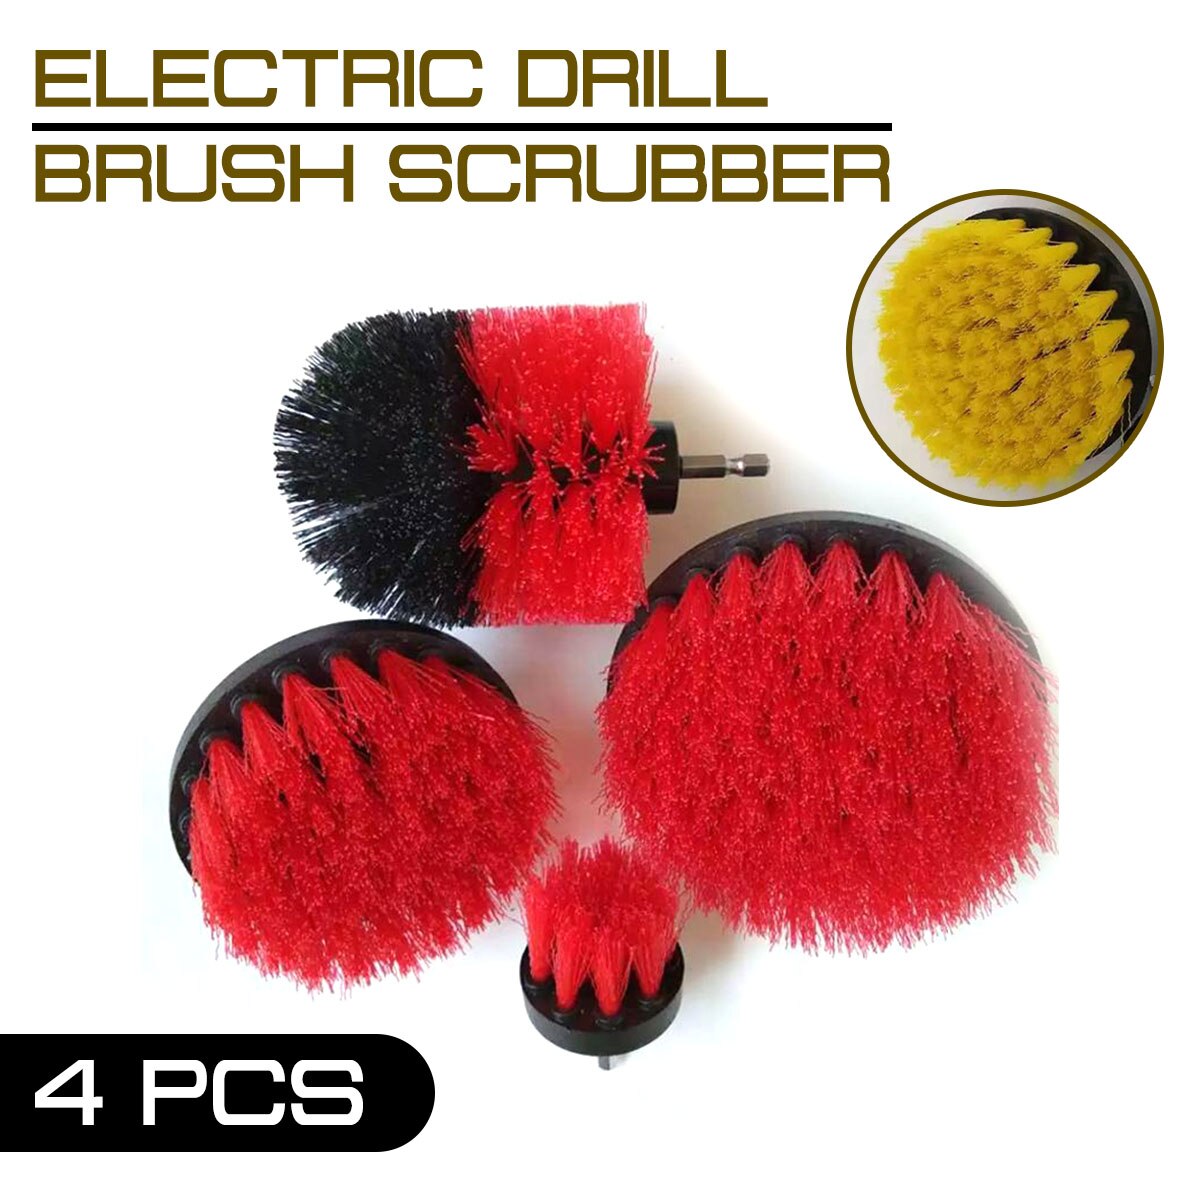 4 Pcs/Set Electric Drill Brush Power Scrubber Brush Drill Clean for Tub Shower Bathroom Surfaces Tile Grout Scrub Cleaning Tool